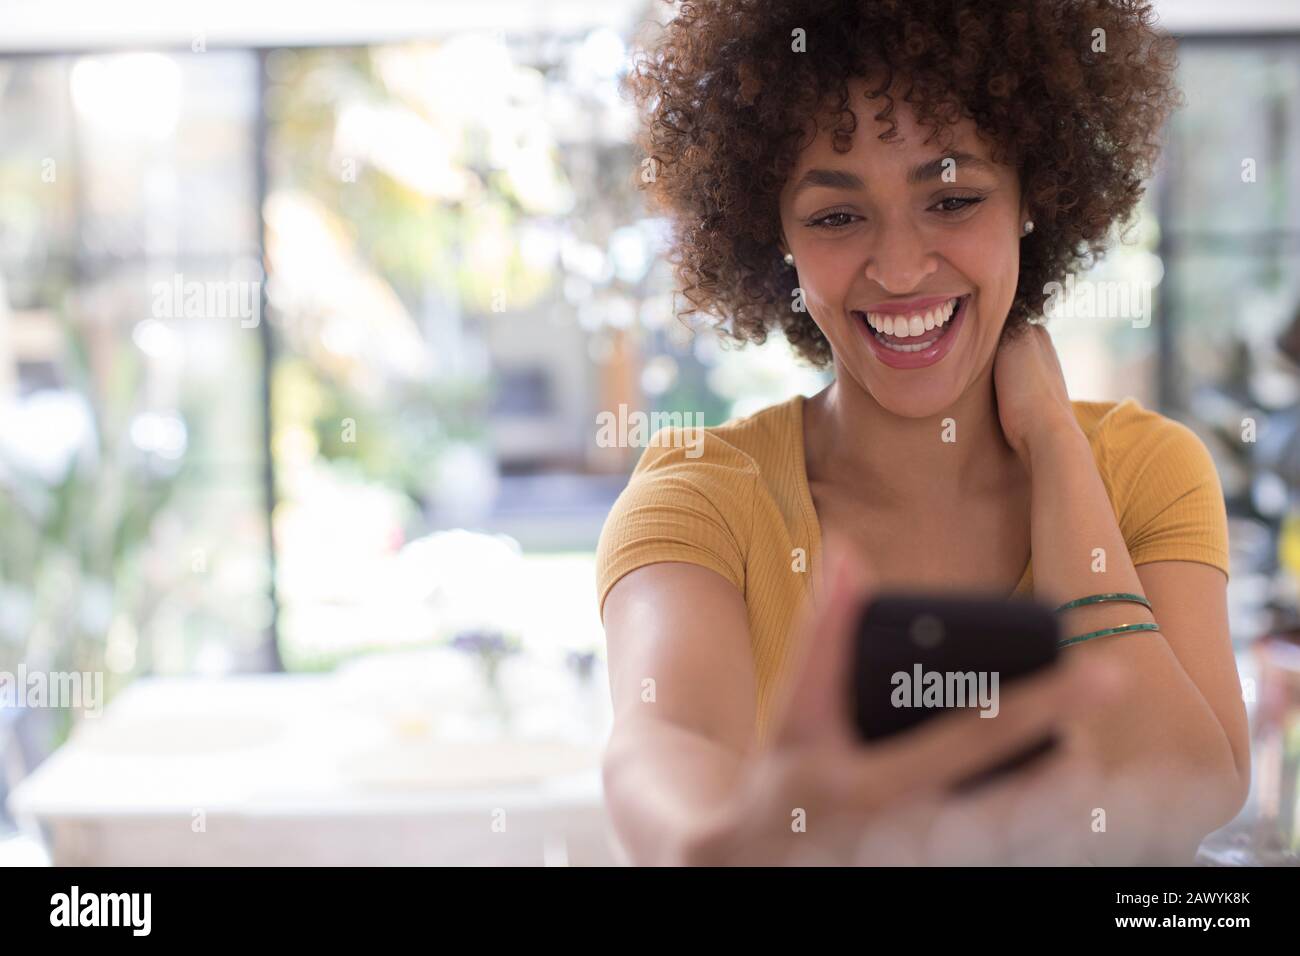 Playful happy young woman taking selfie with camera phone Stock Photo